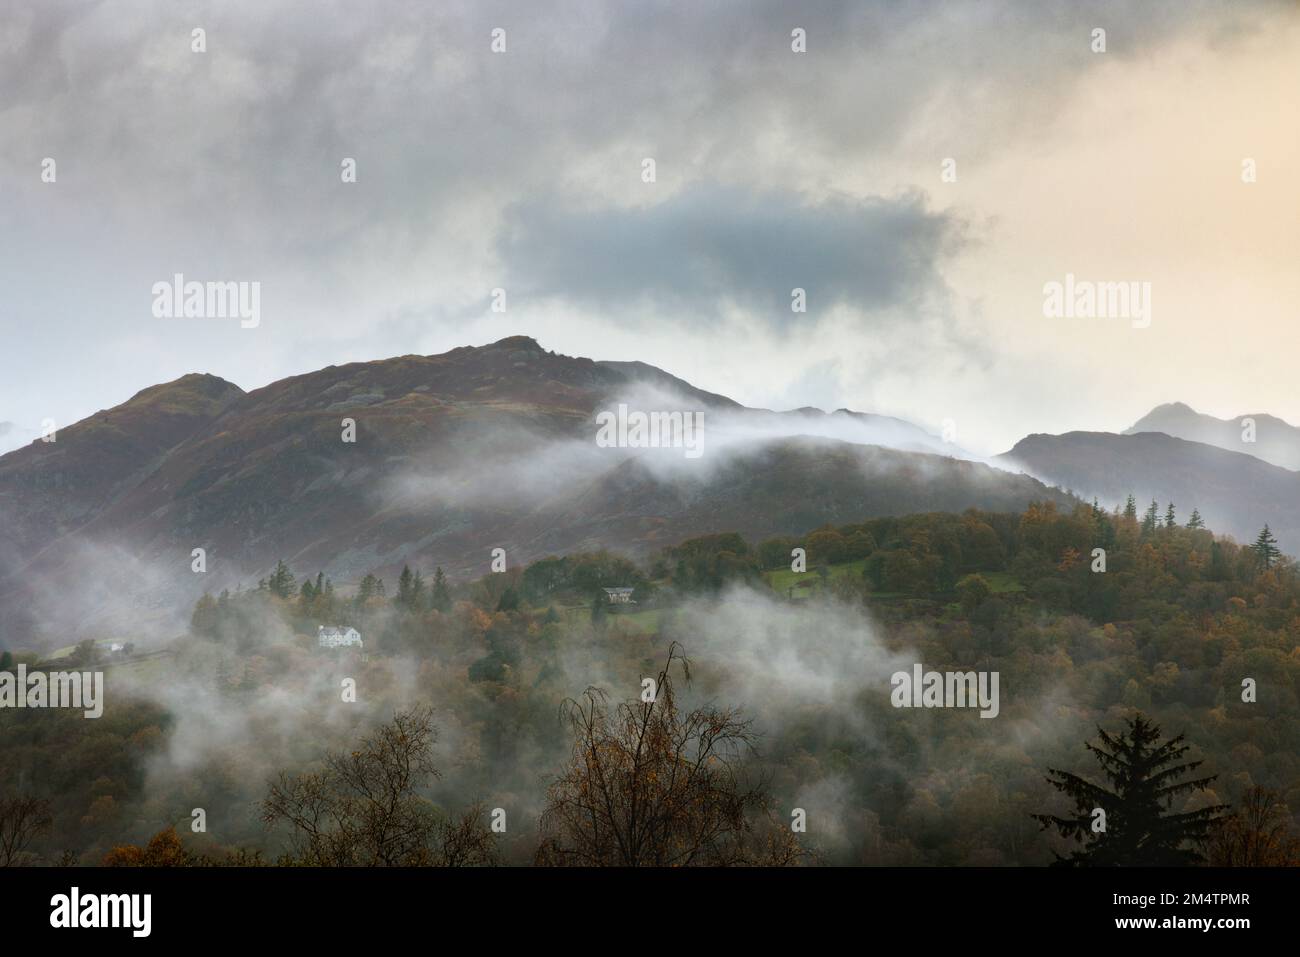 Mist swirling around Ligmoor Fell in the English Lake District. Stock Photo